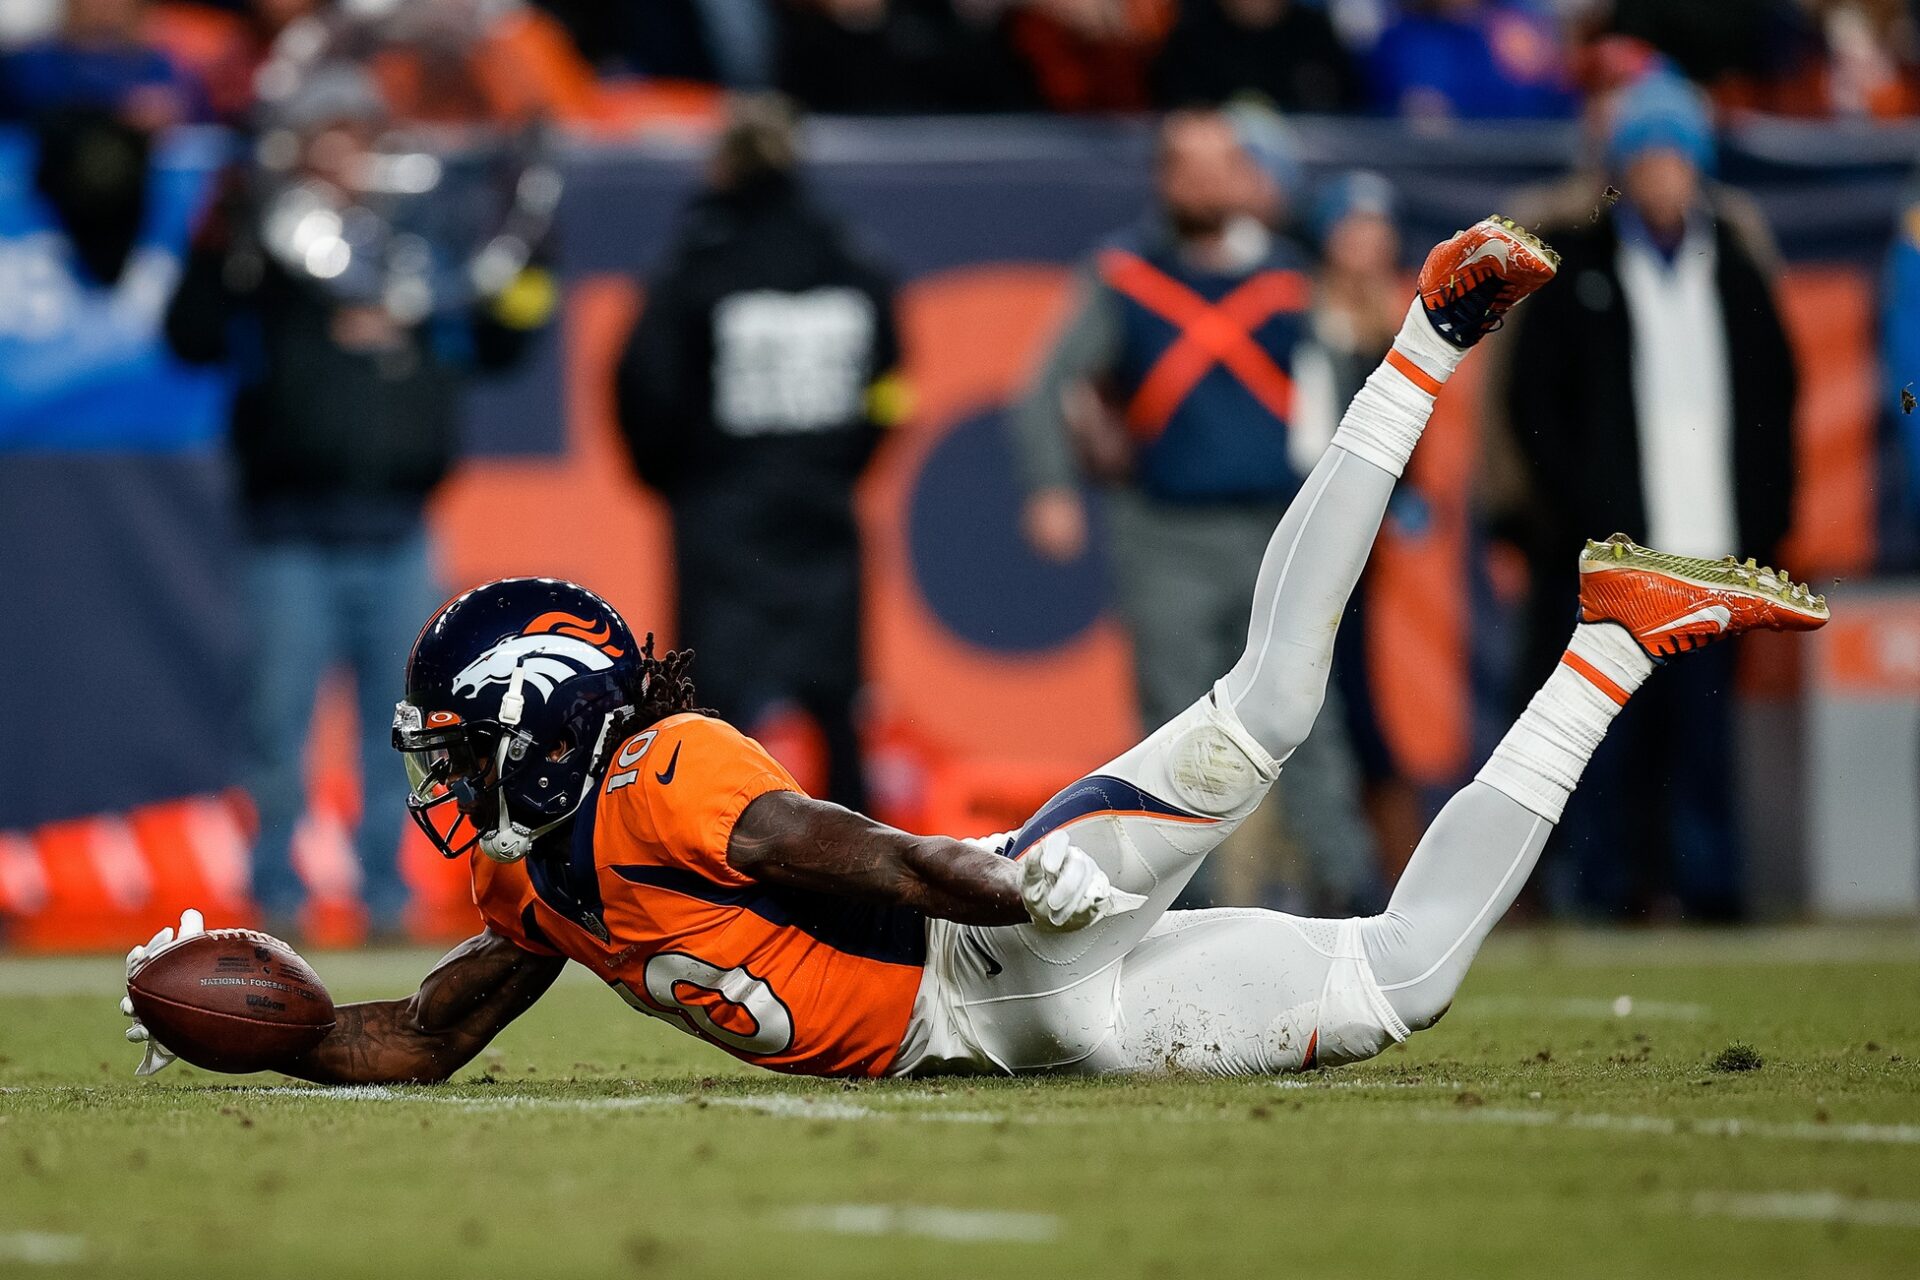 Jerry Jeudy (10) dives to recover a fumble in the fourth quarter against the Los Angeles Chargers at Empower Field at Mile High.